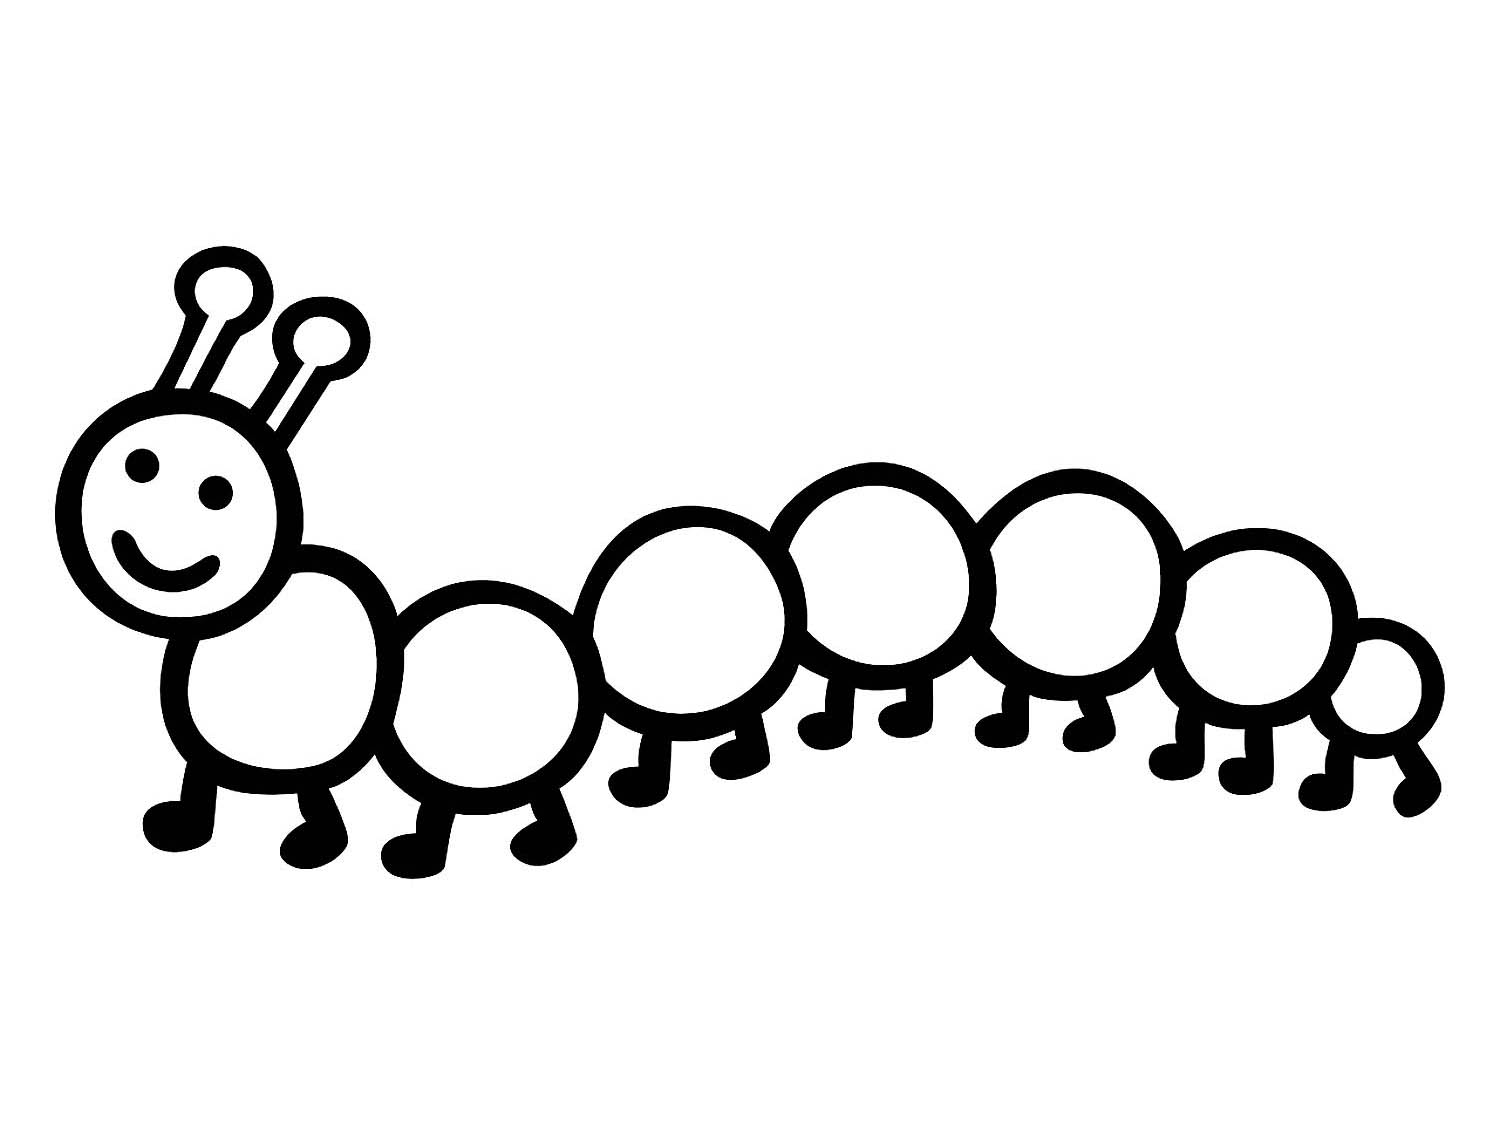 Caterpillar stencils - Free stencils and template cutout printable